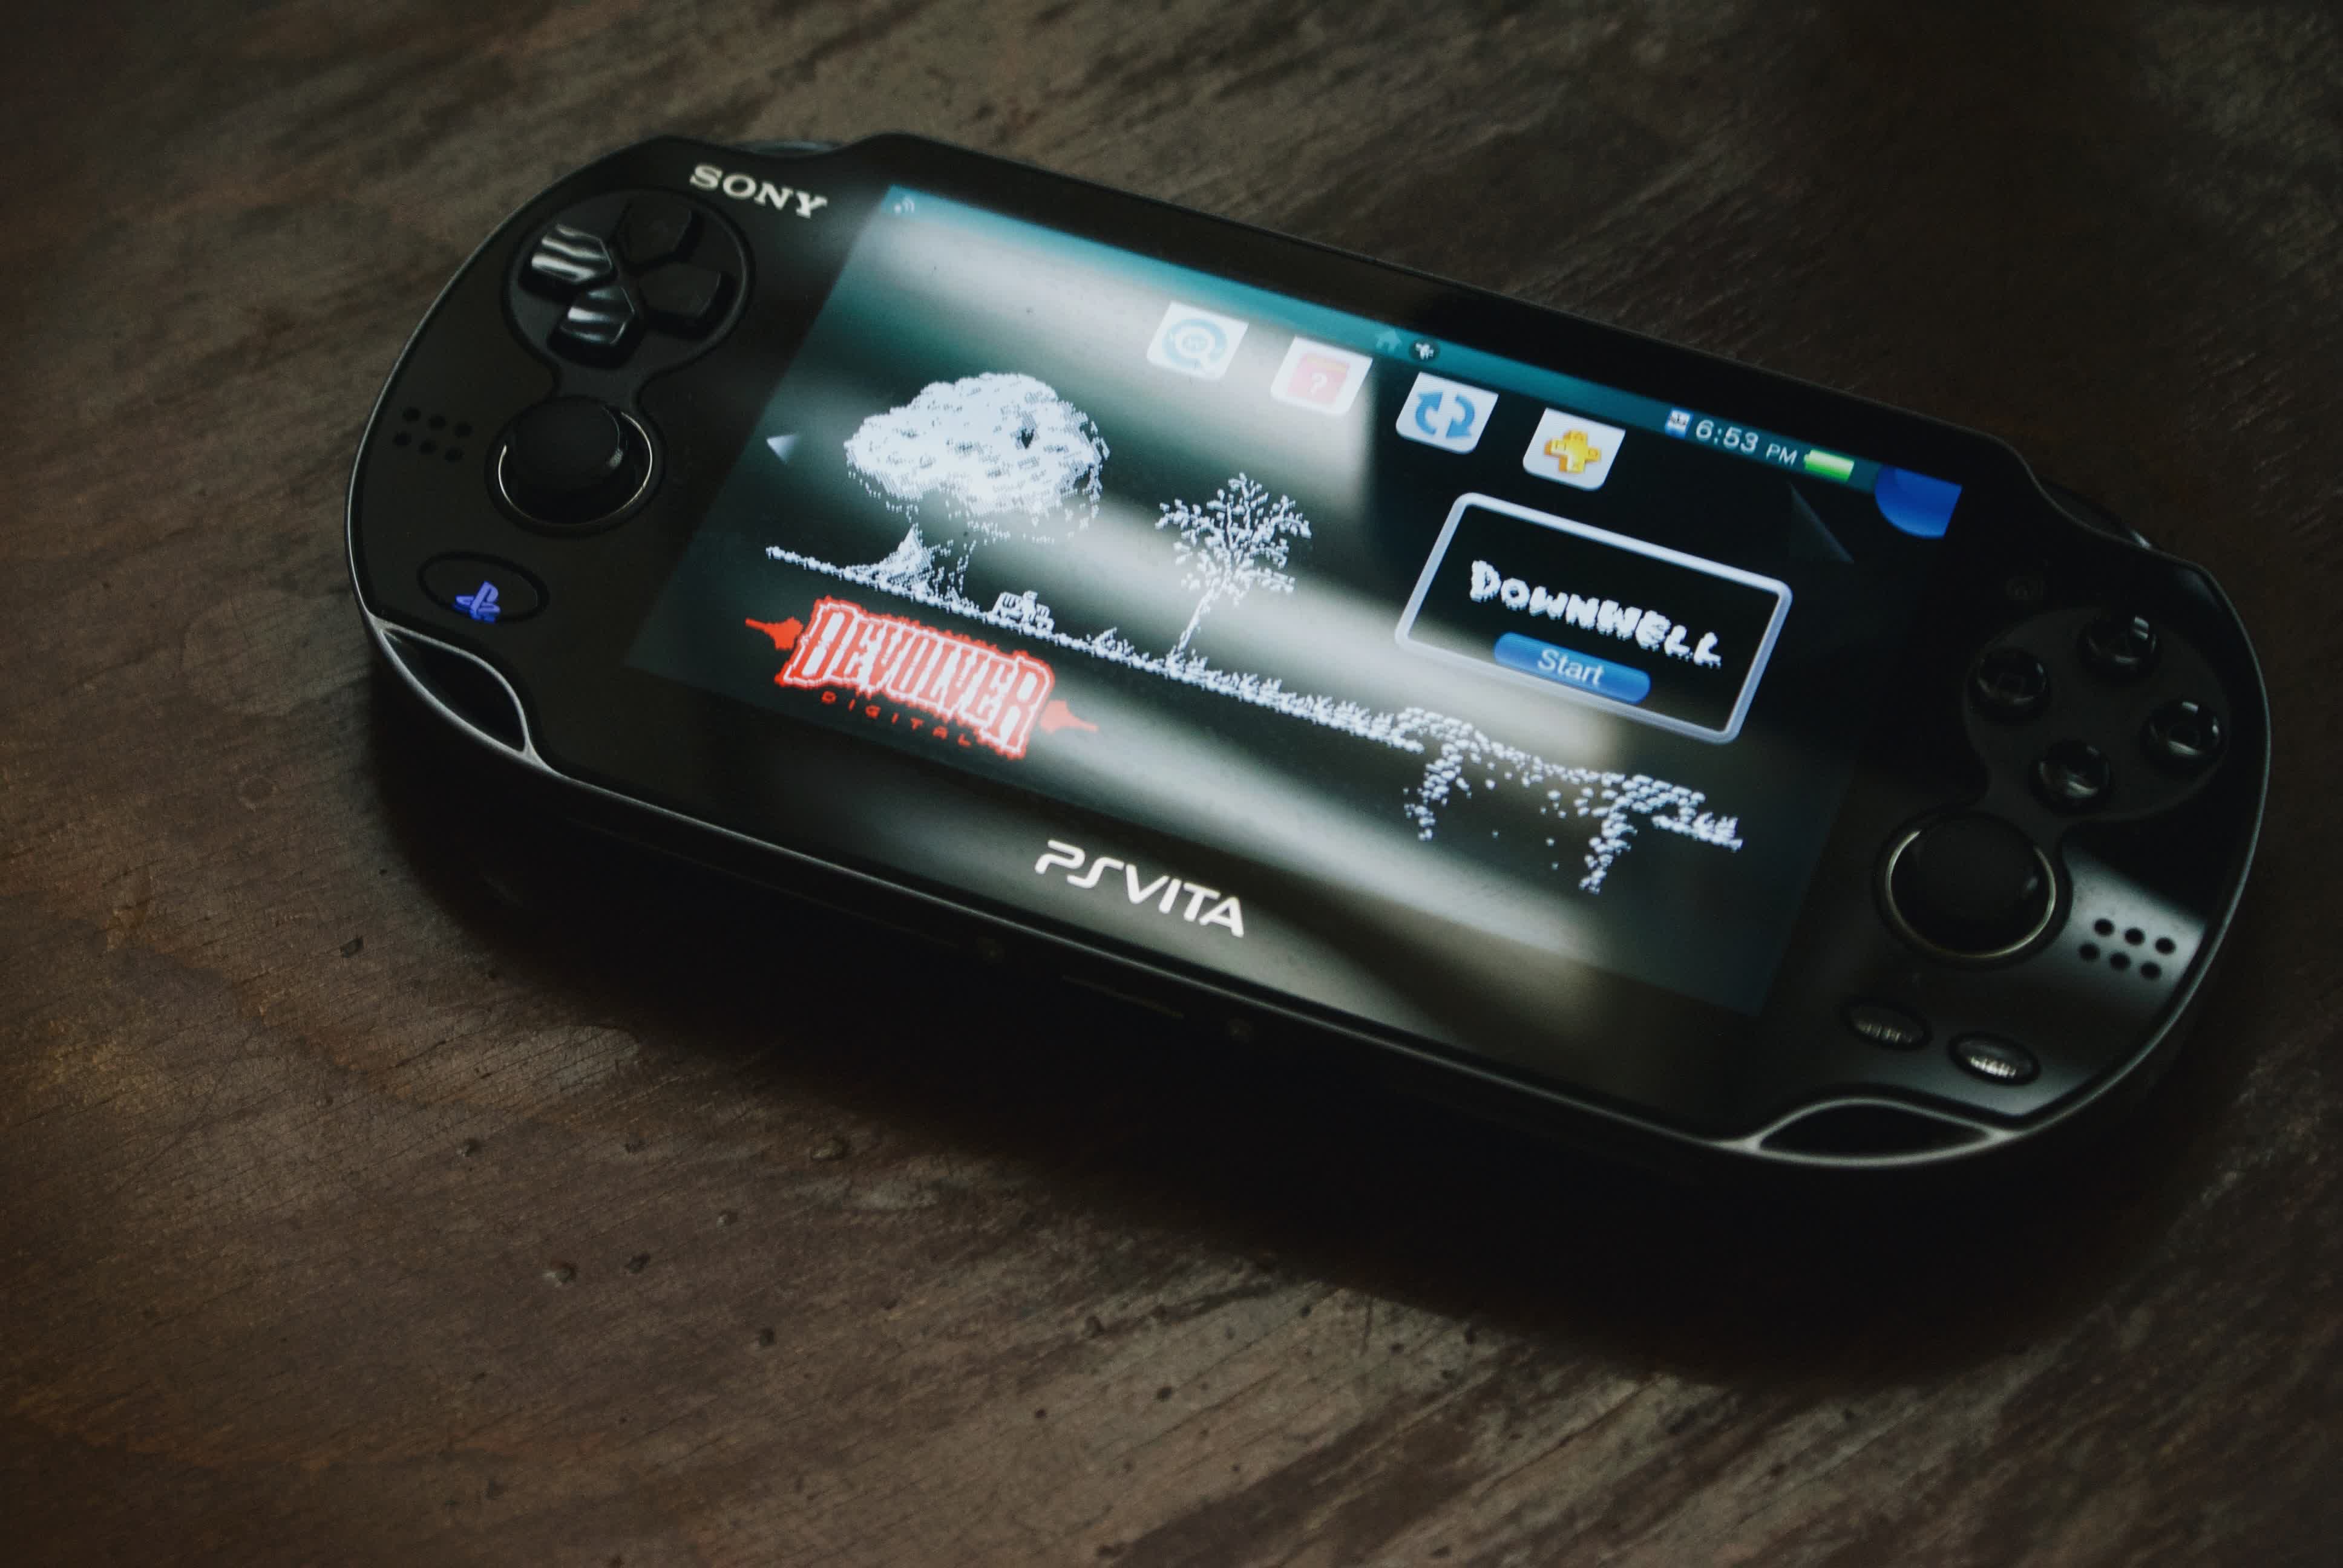 Sony may be working on a new PlayStation portable device codenamed Q Lite